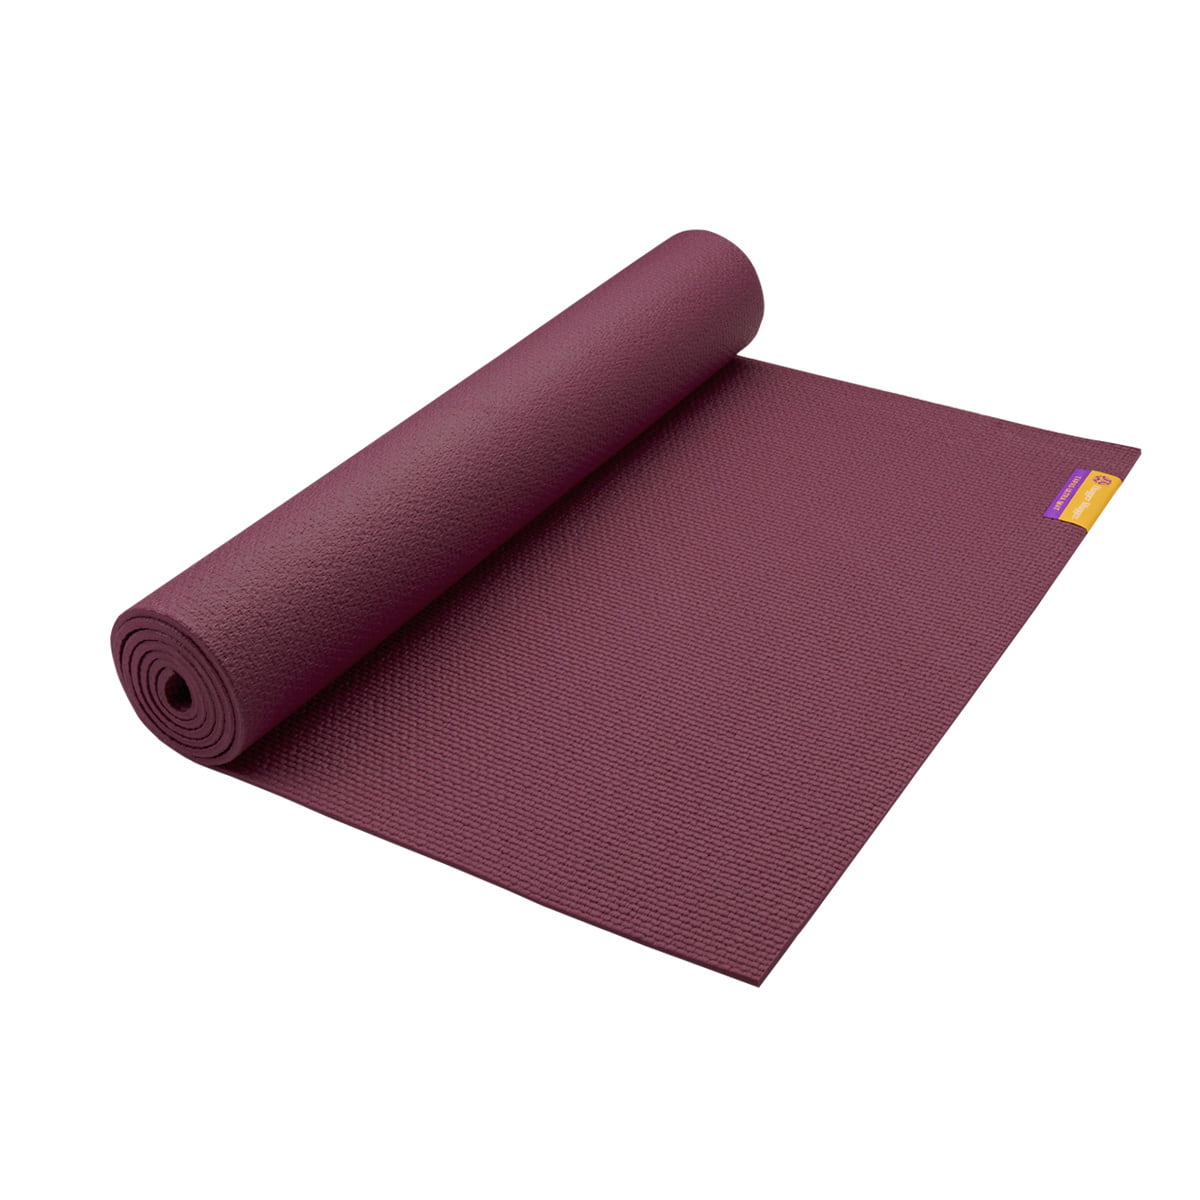 how much do yoga mats cost at walmart